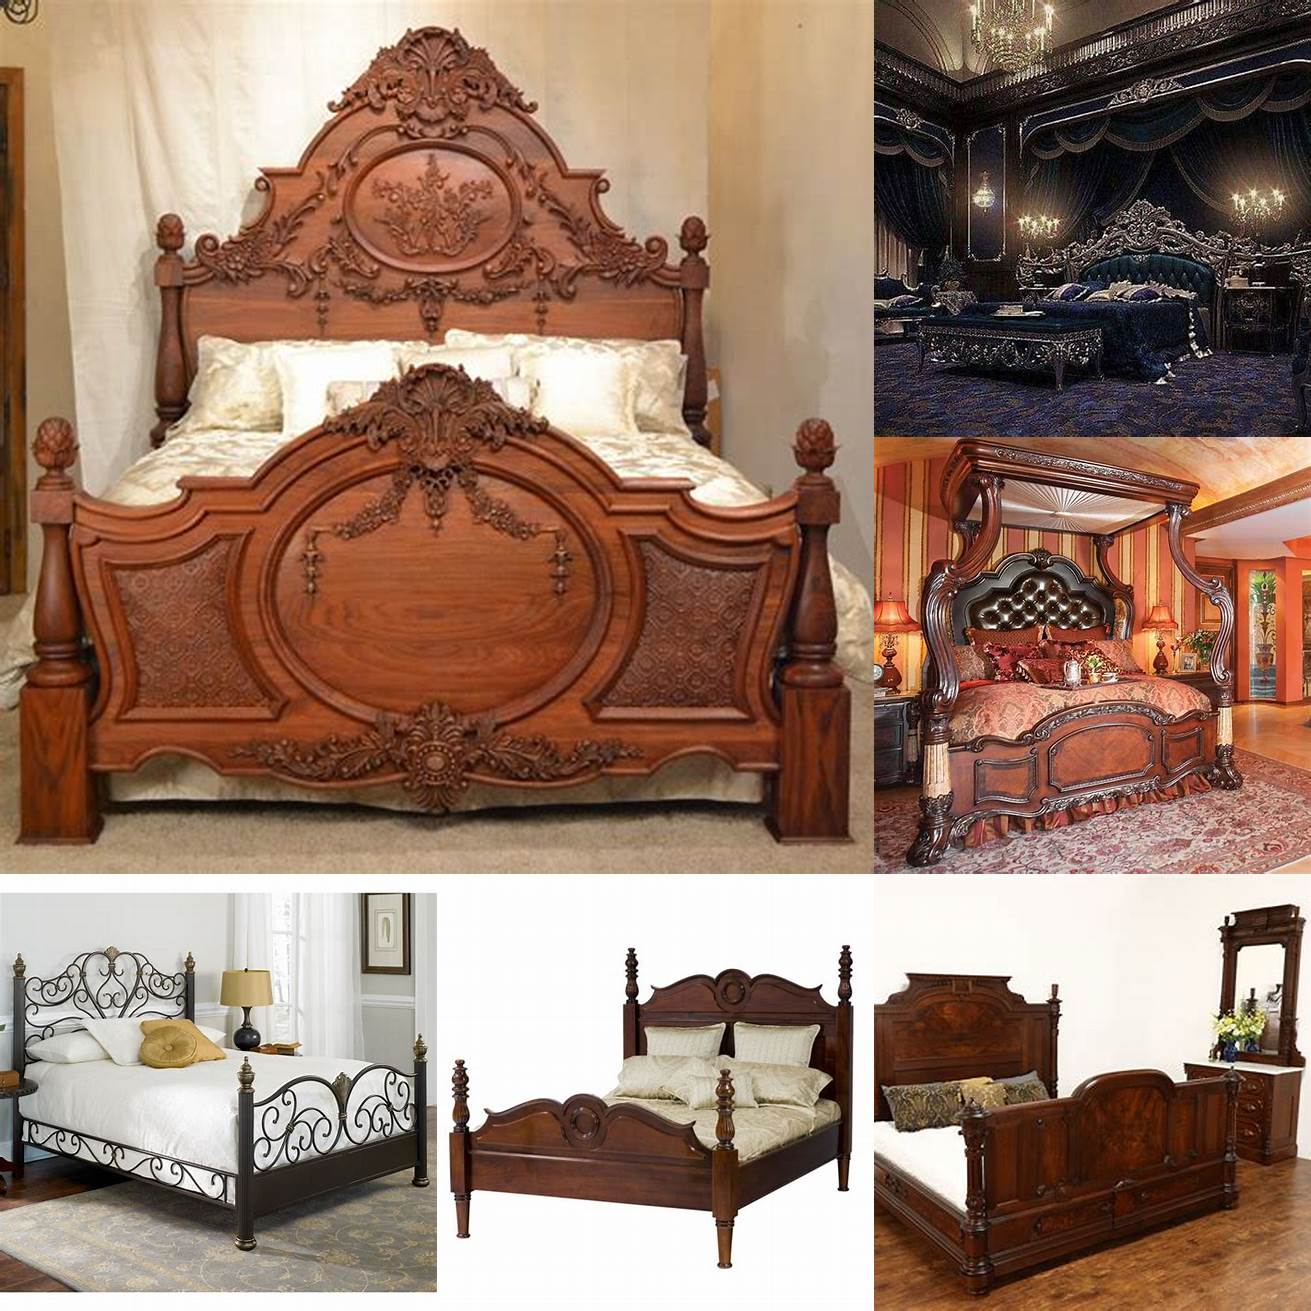 Victorian bed - features ornate details and intricate designs